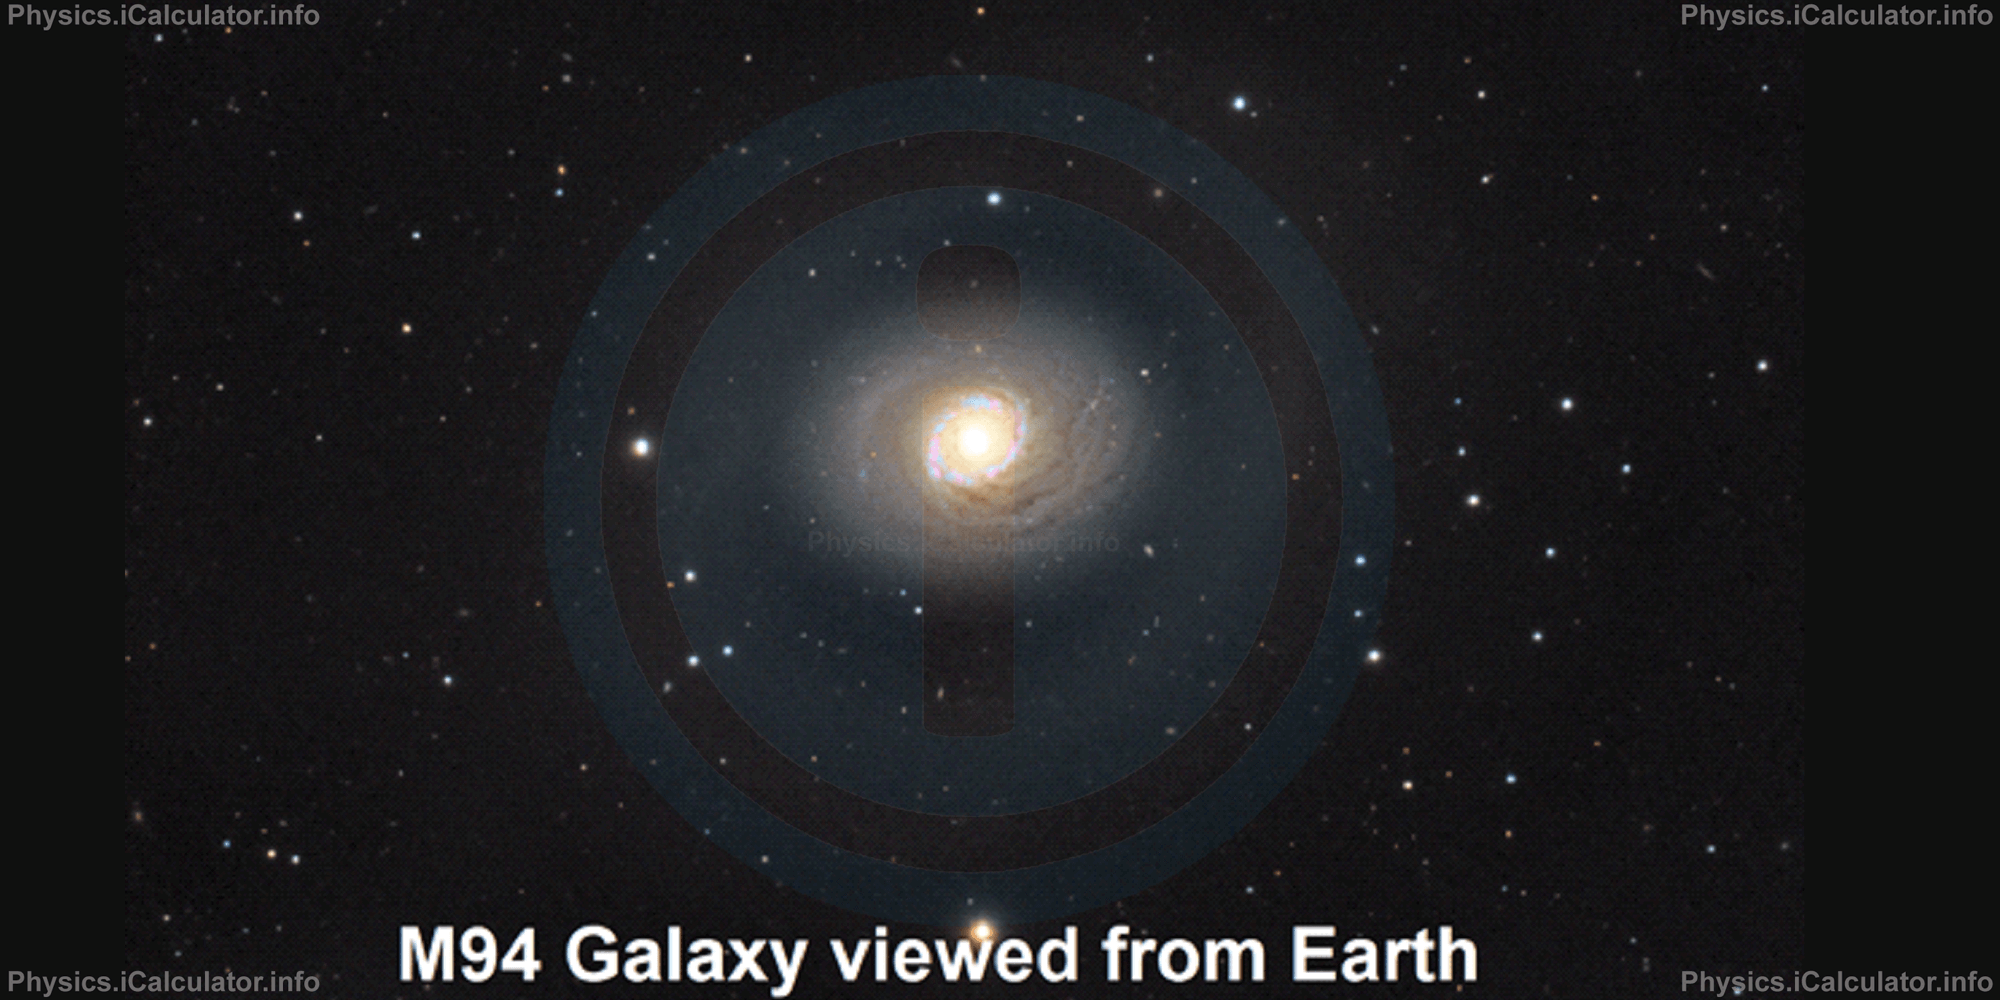 Physics Tutorials: This image provides visual information for the Cat's Eye Galaxy 